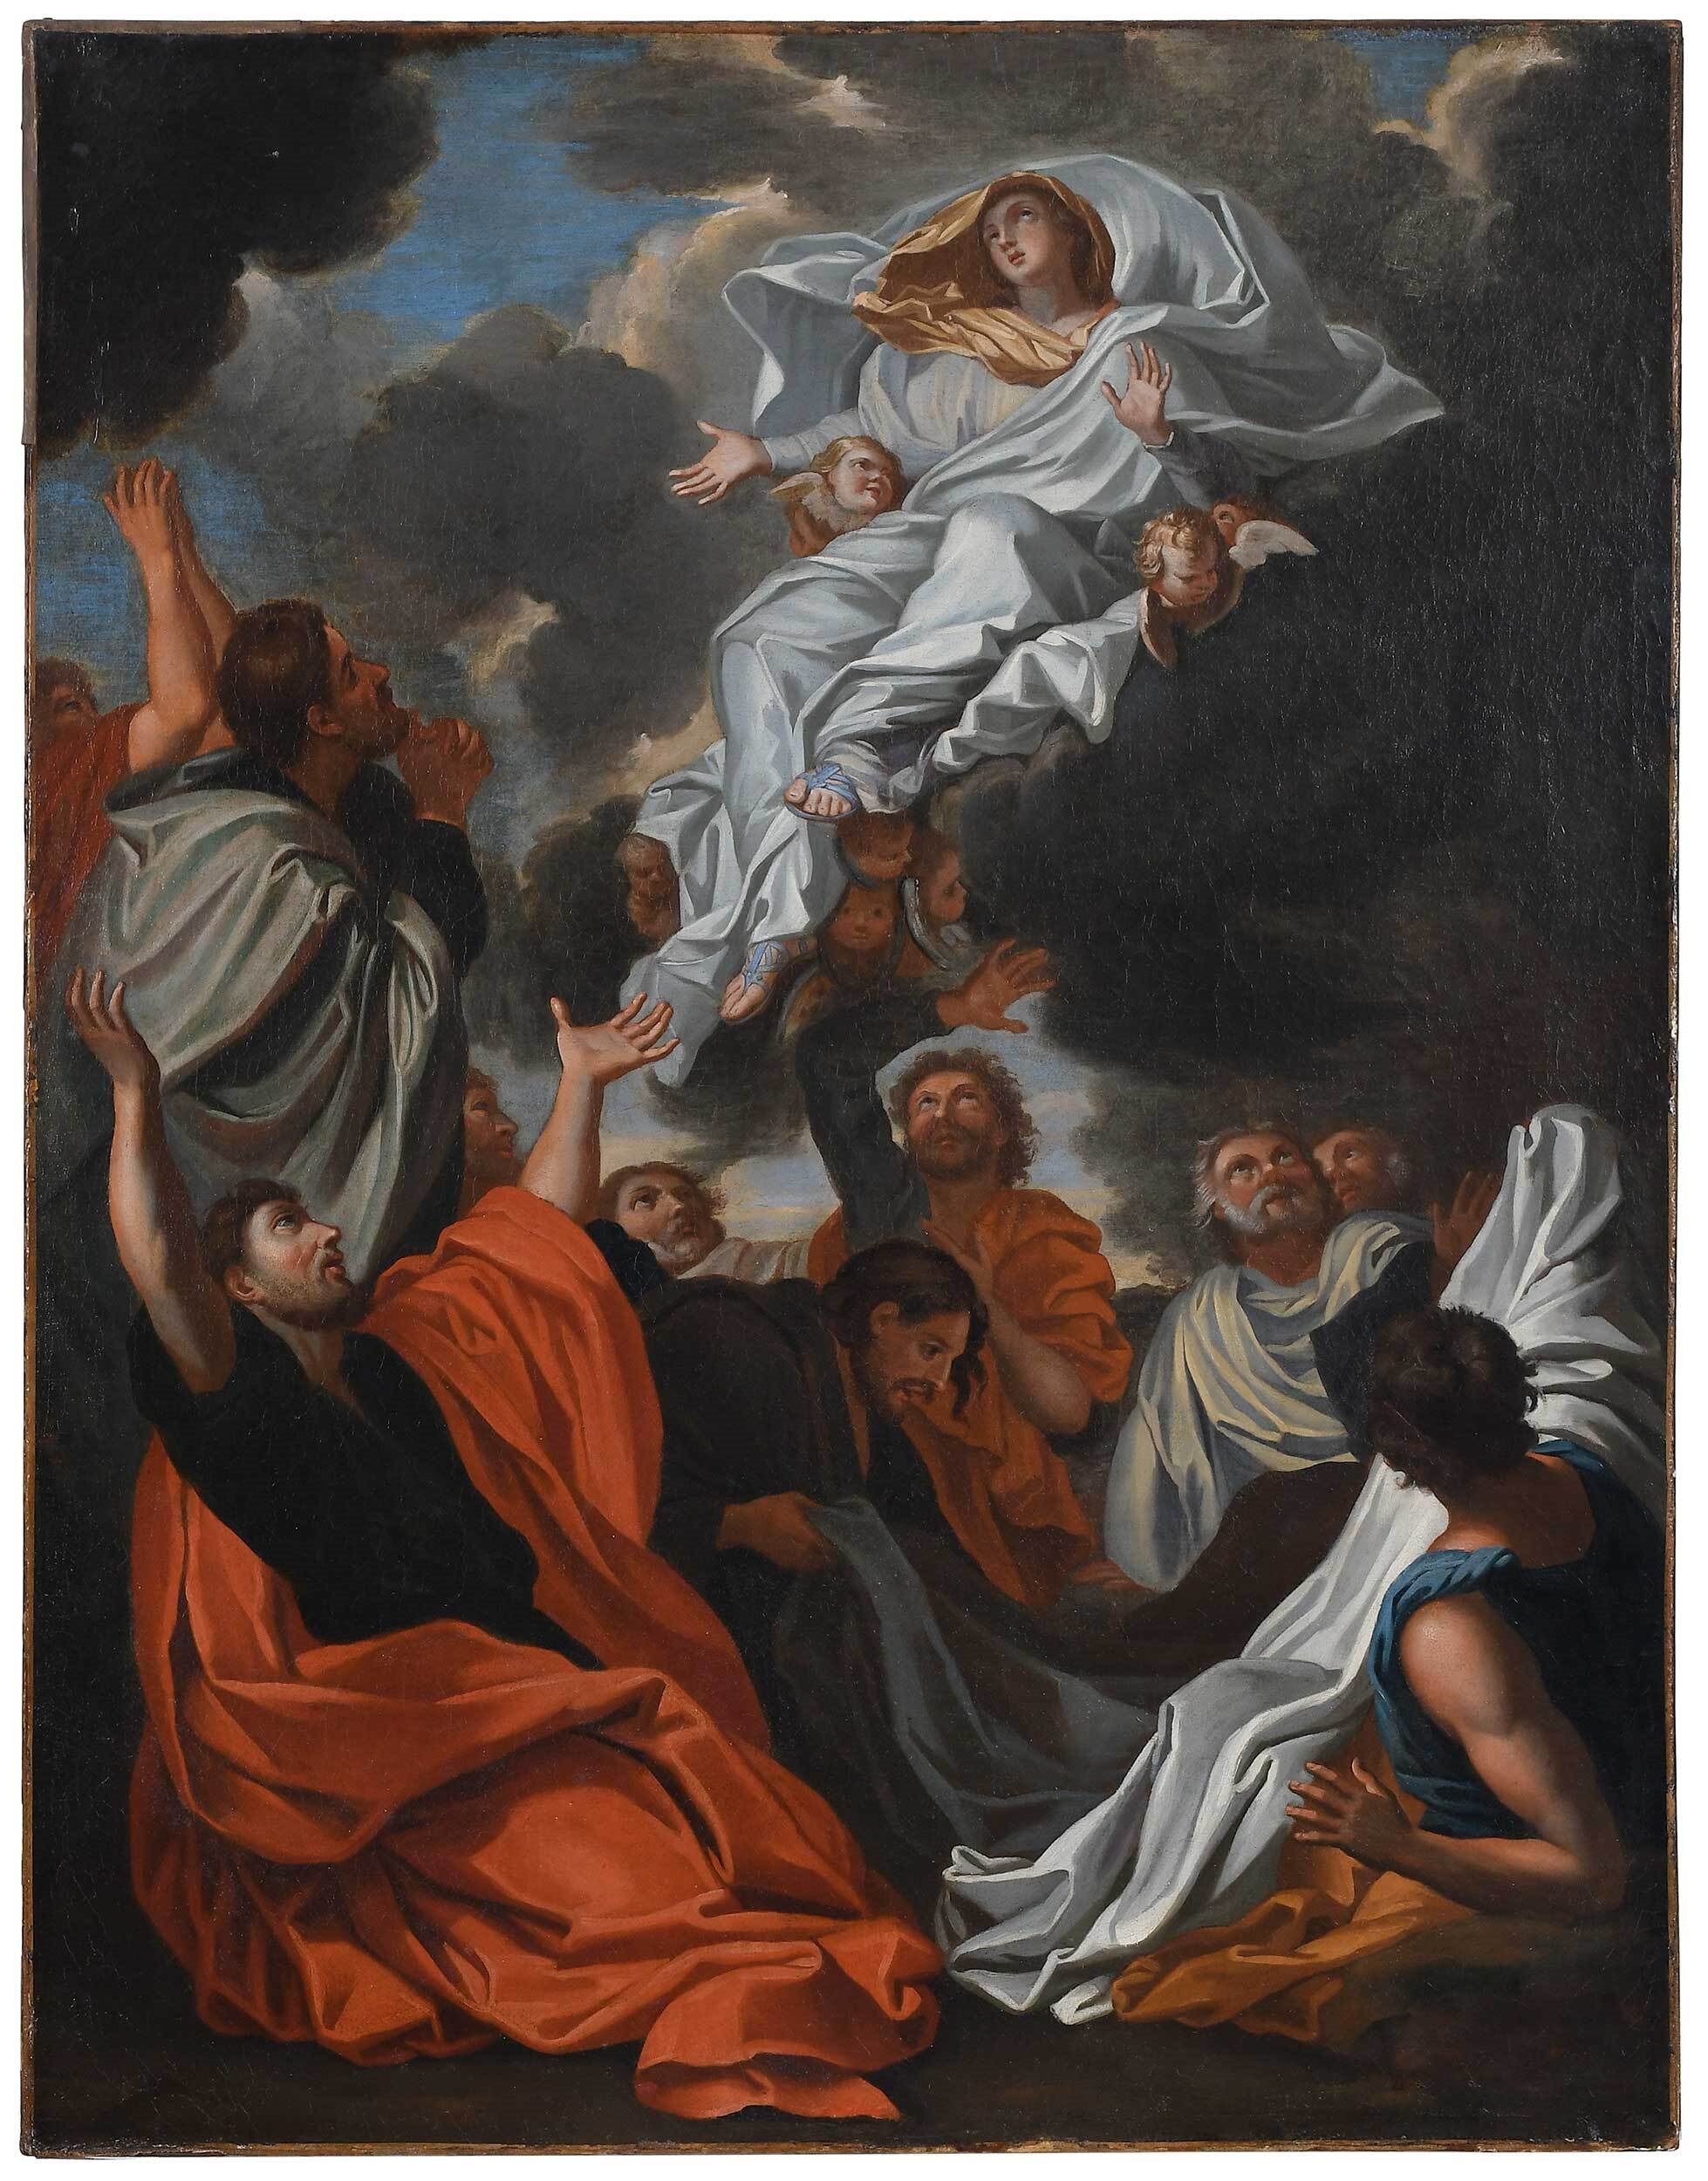 Assumption of the Virgin by Nicolas Poussin